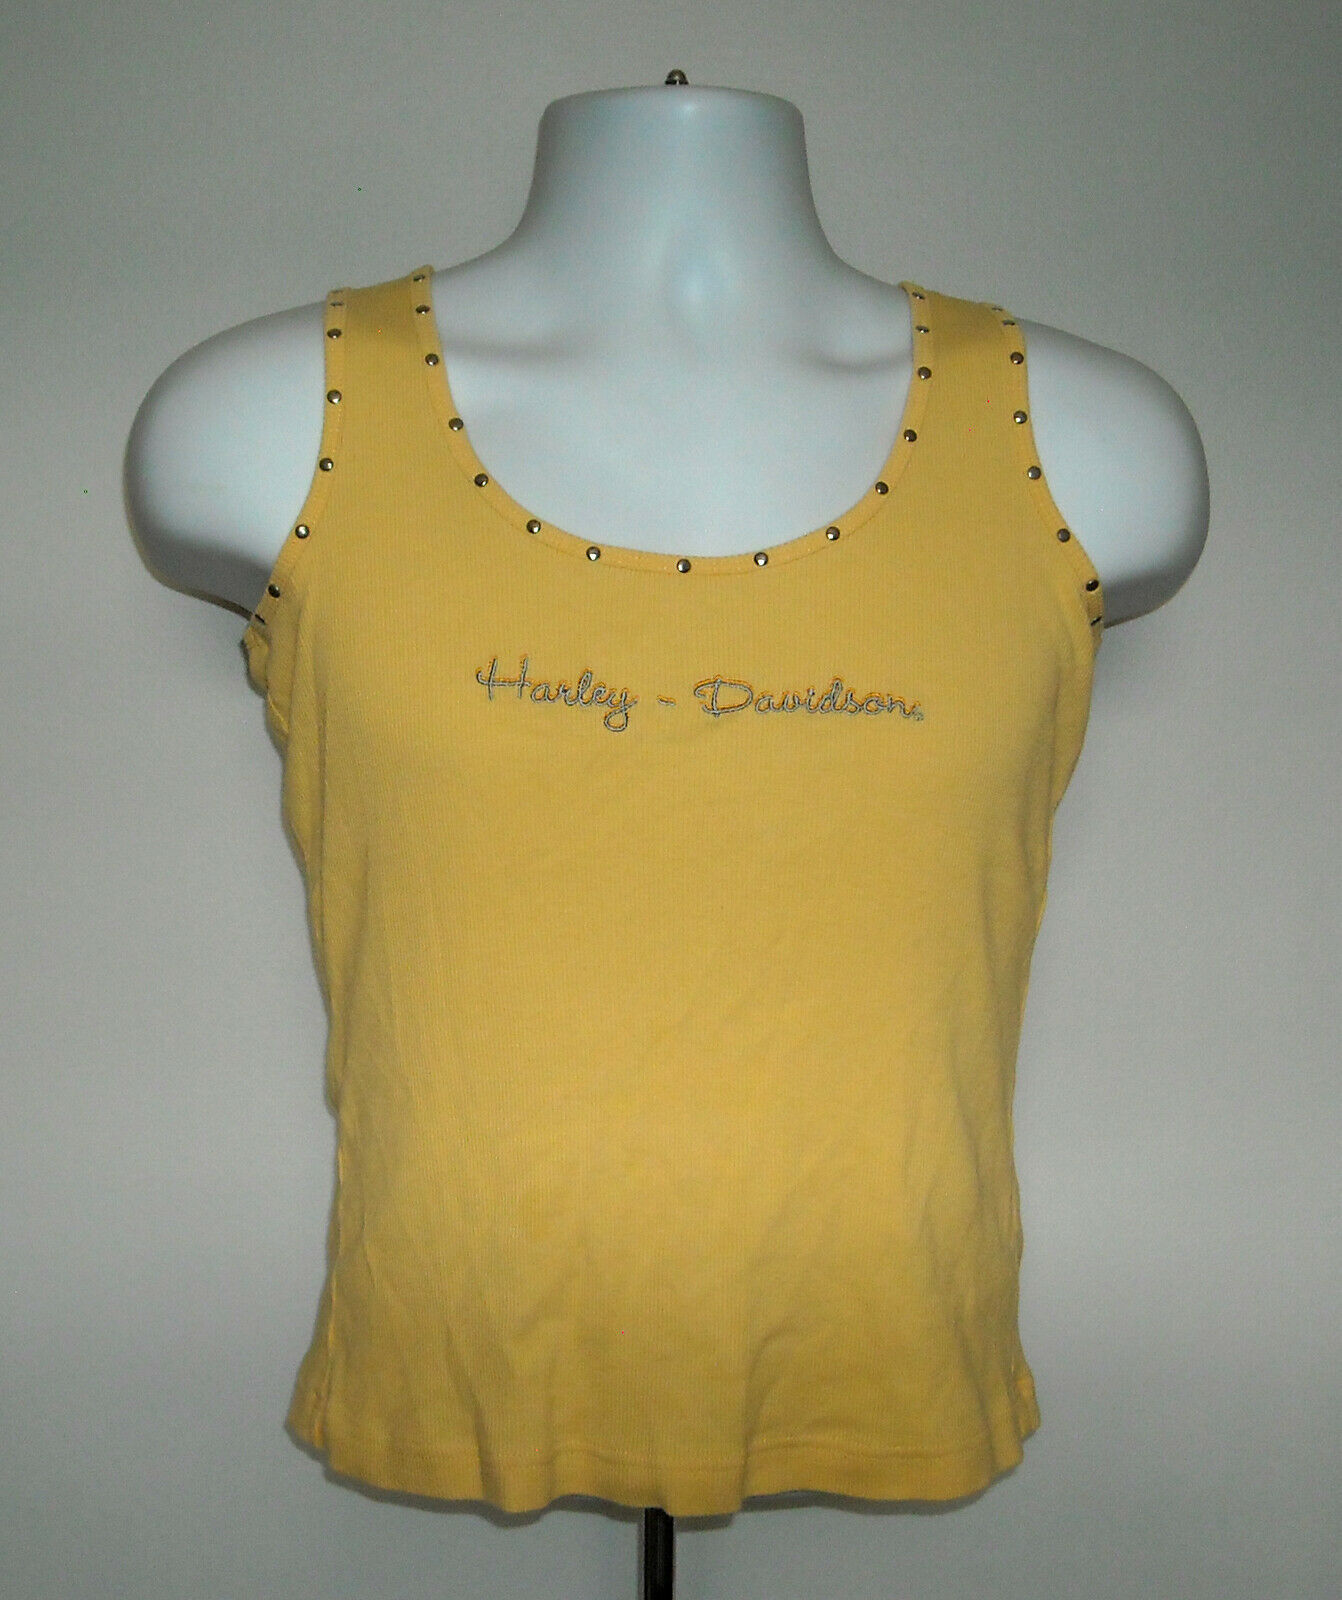 Harley Davidson Roosters Sioux City Iowa Ribbed tank Top Shirt Womens Medium - $21.73